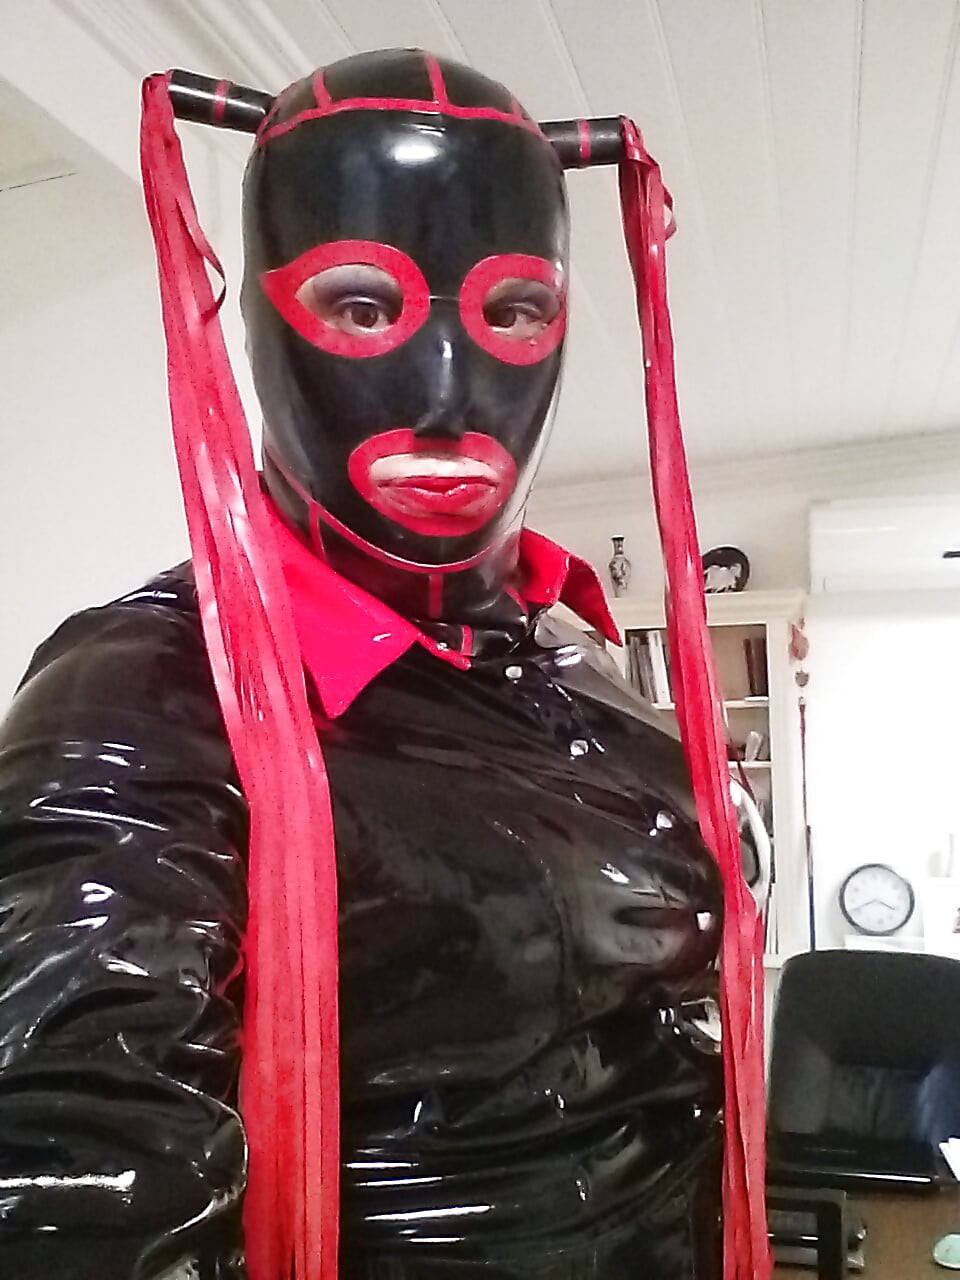 Latex Hood Gallery - Latex Mask Porn Pictures, XXX Photos, Sex Images #4031694 - PICTOA